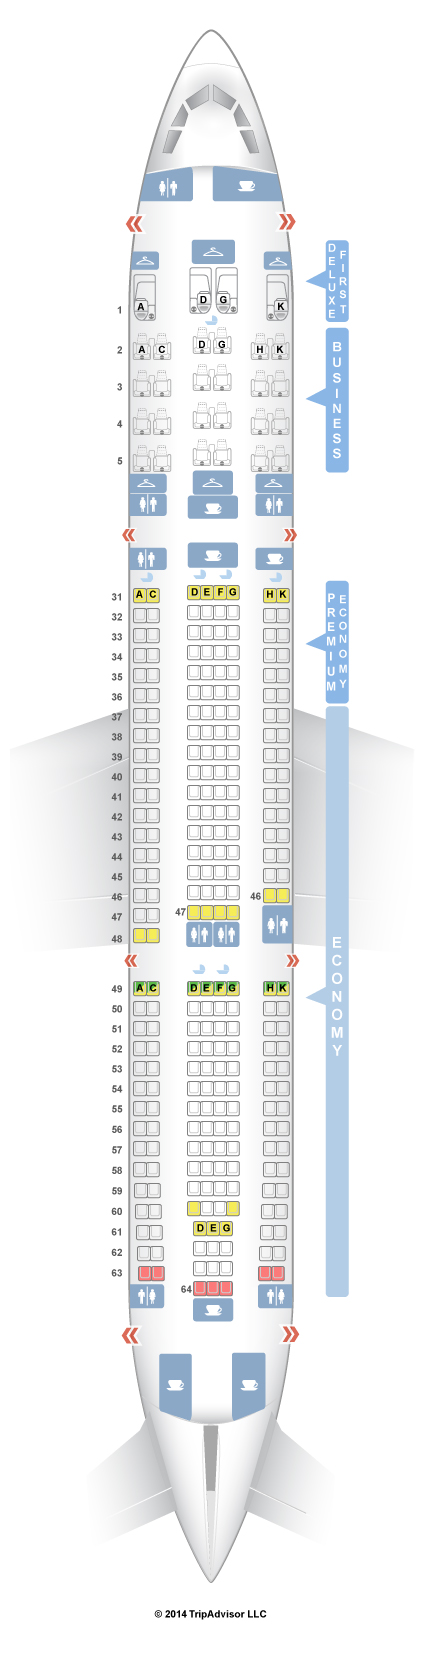 33+ Western And Southern Open Seating Chart